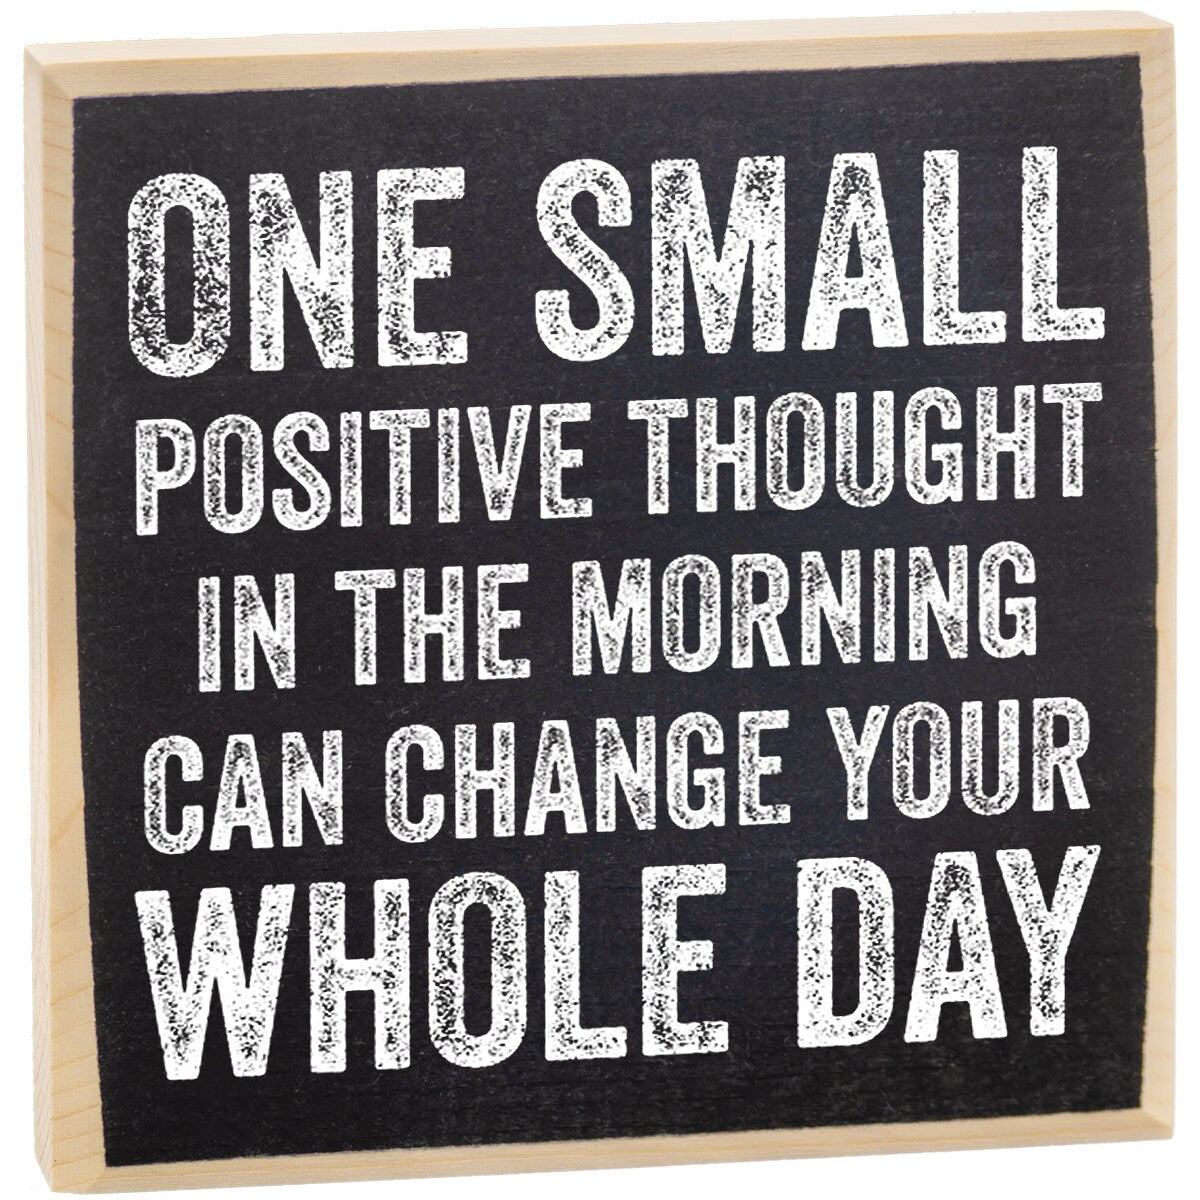 Rustic Wooden Sign - One Small Positive Thought - Makes a Great Gift and Decor Lone Star Art 